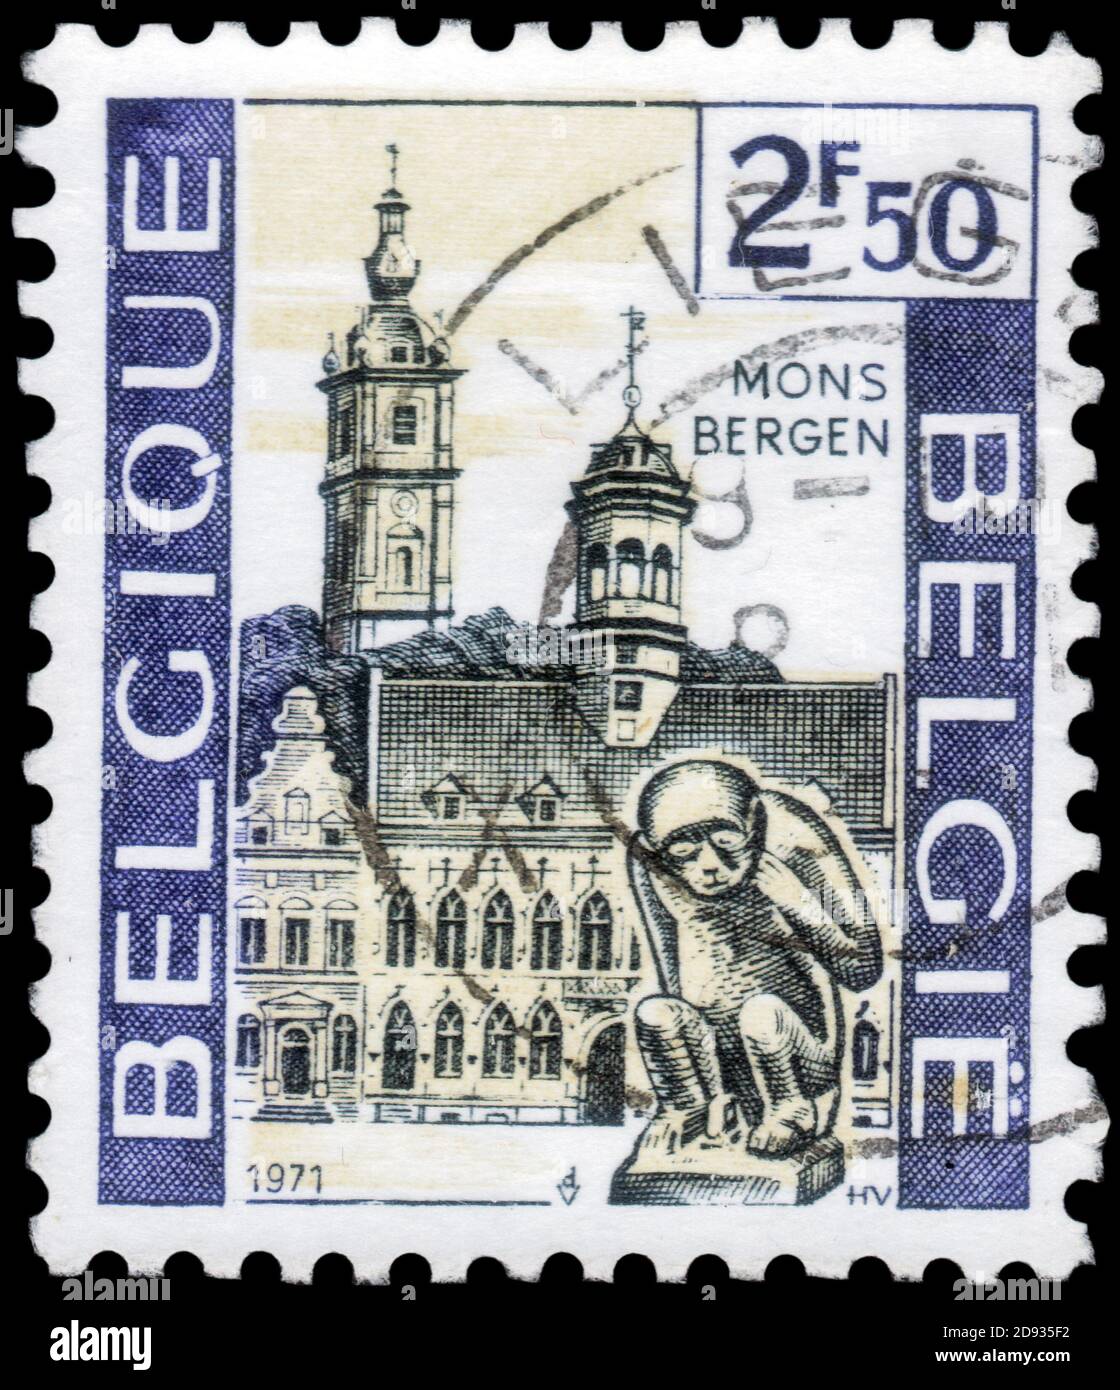 Saint Petersburg, Russia - September 18, 2020: Stamp printed in the Belgium with the image of the City Hall and Belfry, Mons - Bergen, circa 1971 Stock Photo